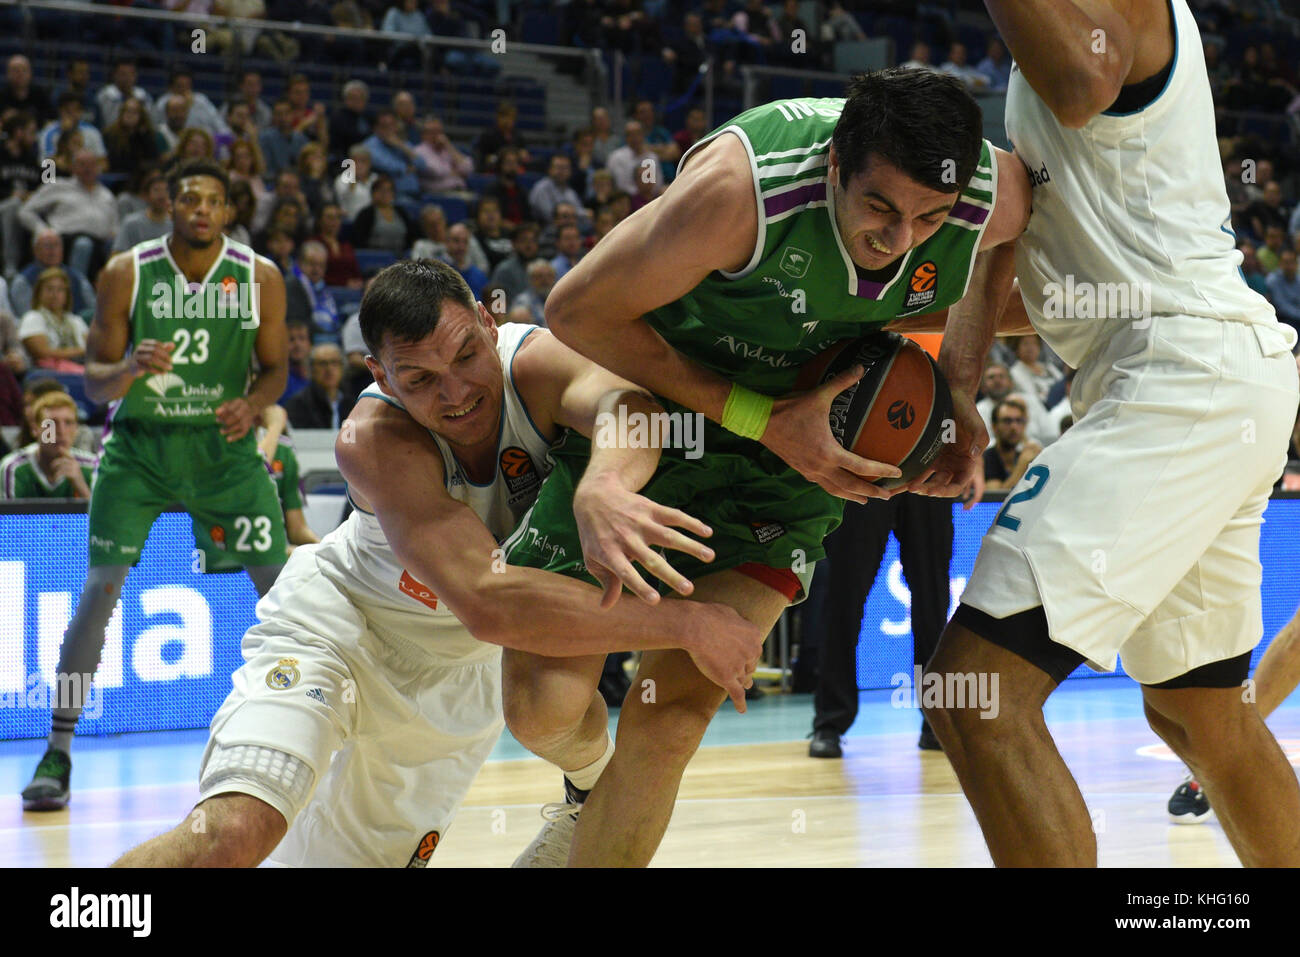 Madrid, Spain. 16th Nov, 2017. Giorgi Shermadini (center), #17 of Unicaja and Jonas Maciulis (left) #8 of Real Madrid, in action during the Euroleague basketball match between Real Madrid and Unicaja Málaga played at WiZink center in Madrid. Credit: Jorge Sanz/Pacific Press/Alamy Live News Stock Photo